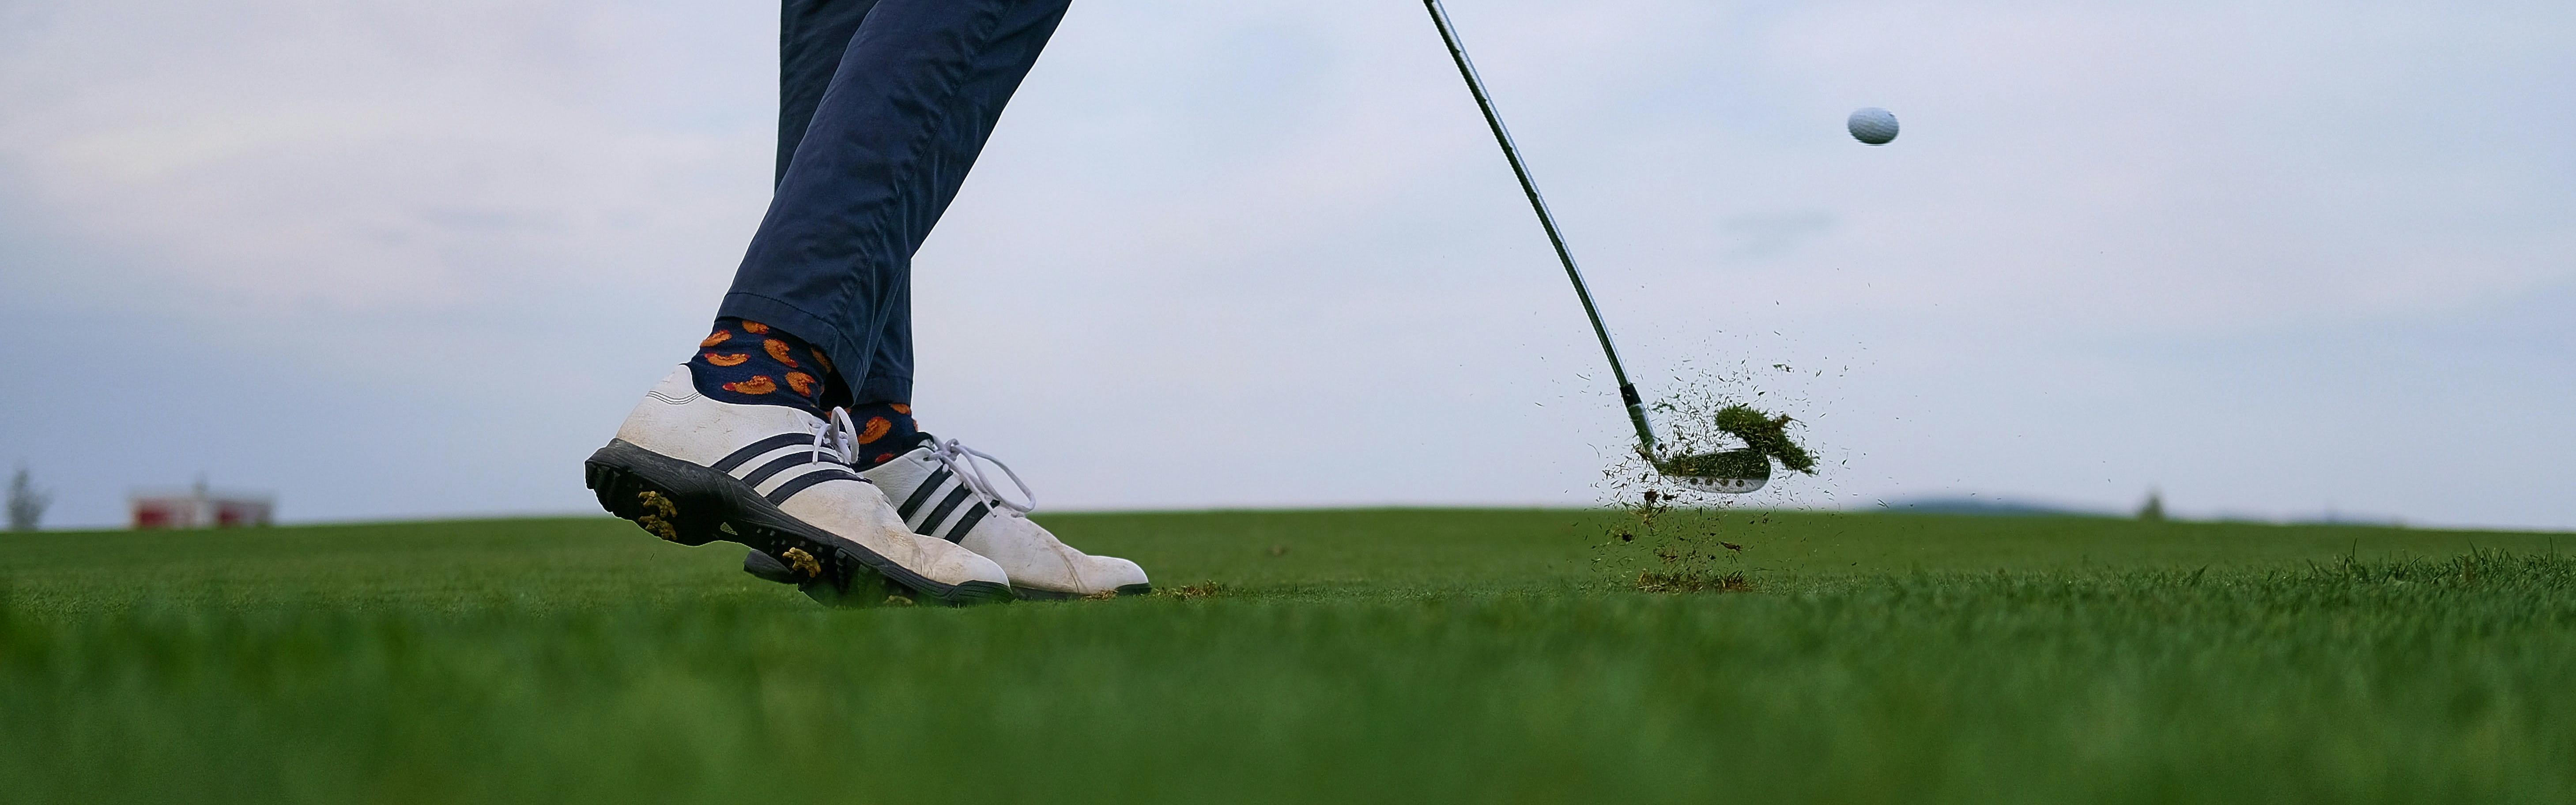 How To Safely Post Up On Lead Side For MAX Golf Swing Speed 